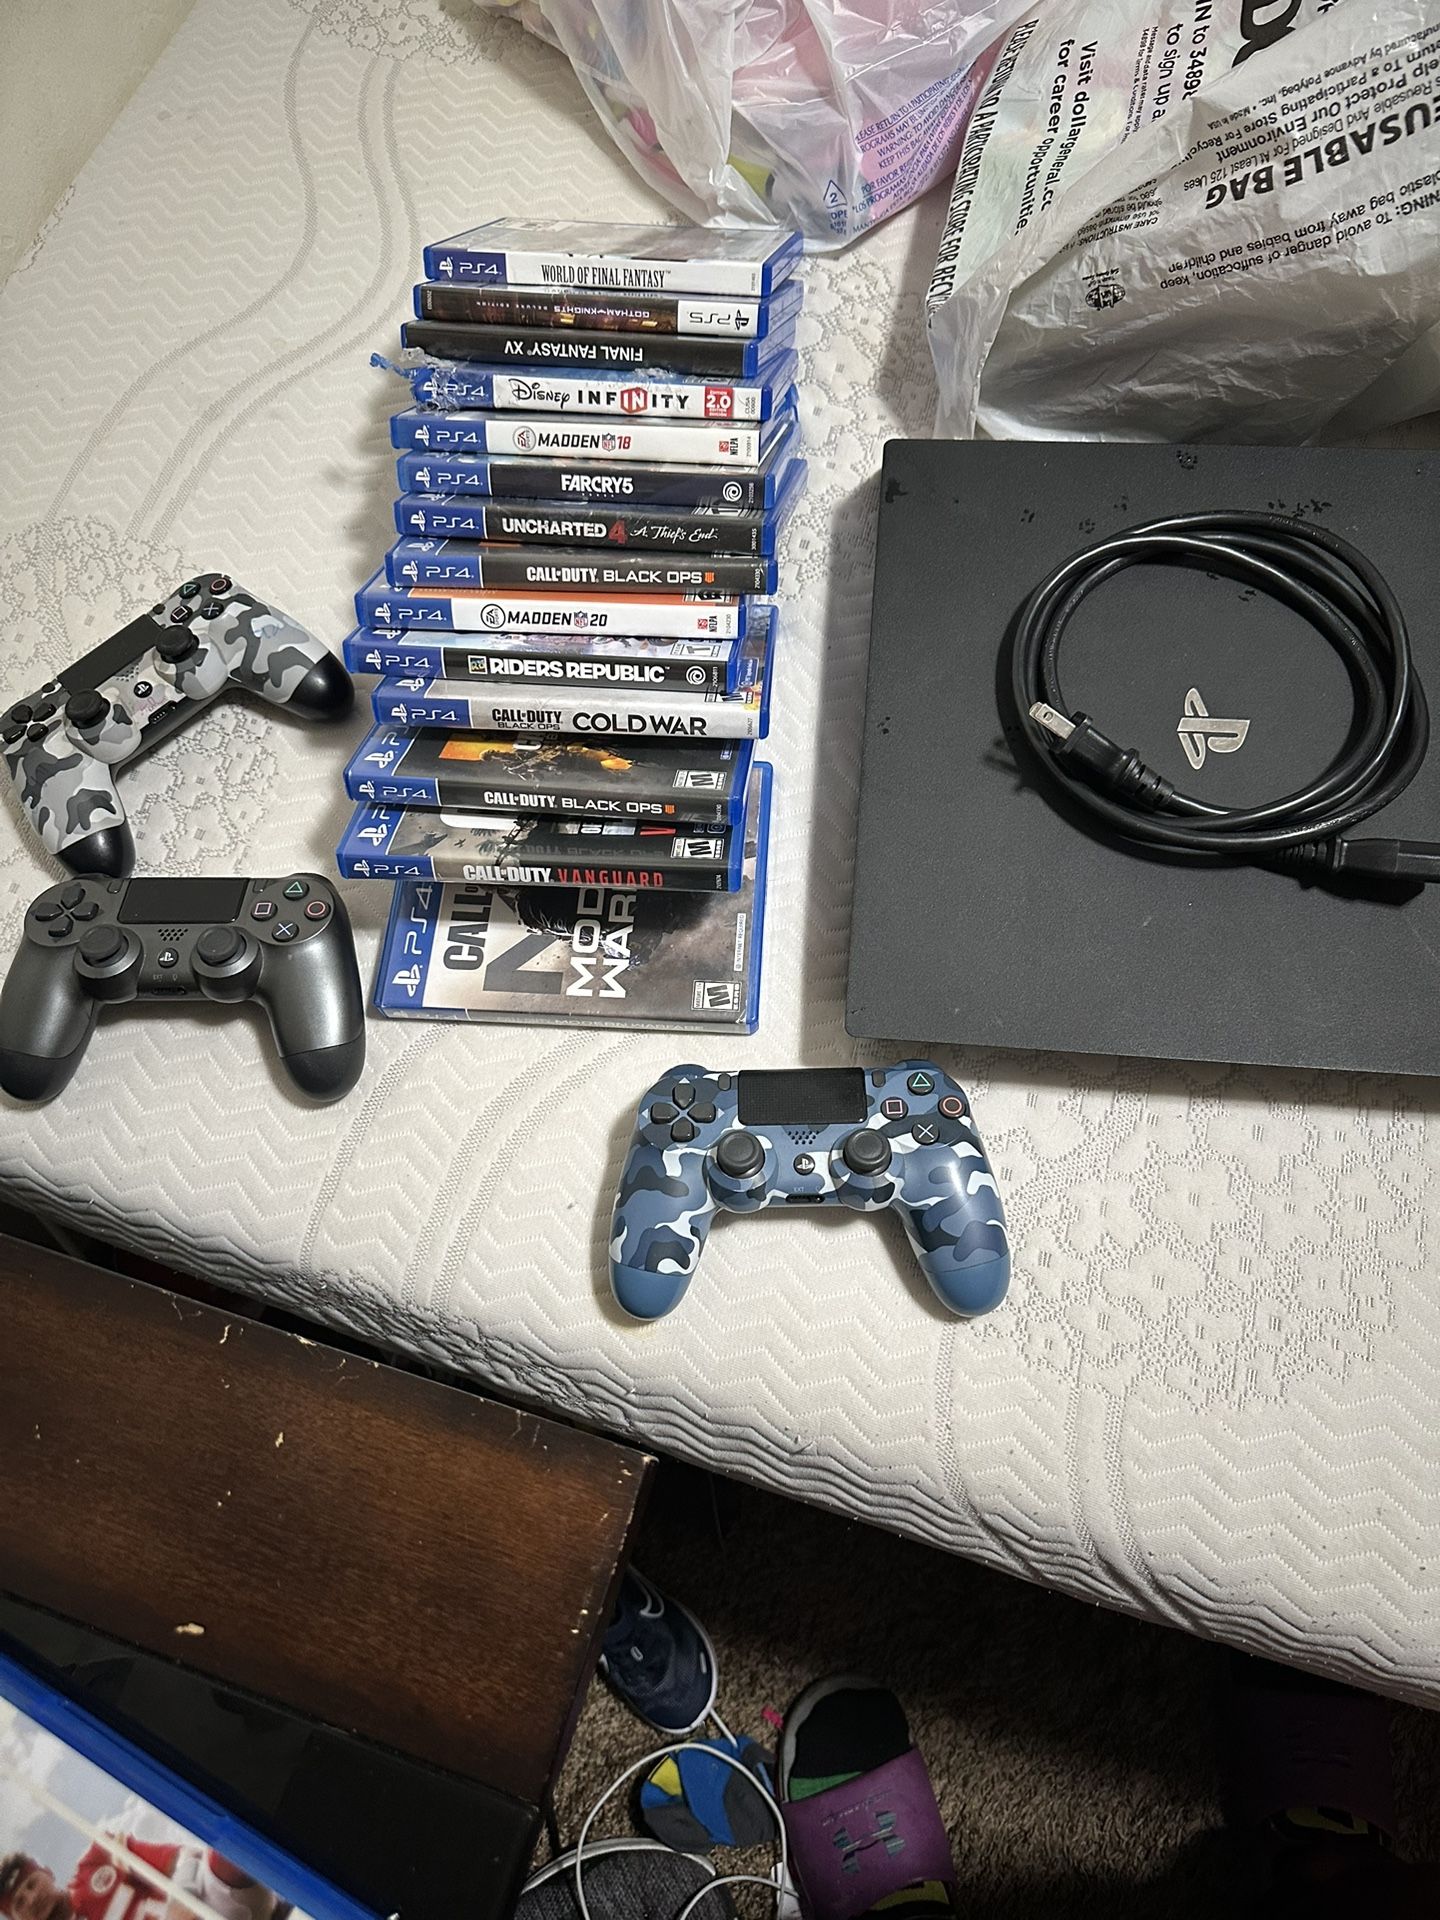 ps4 pro with games and controllers